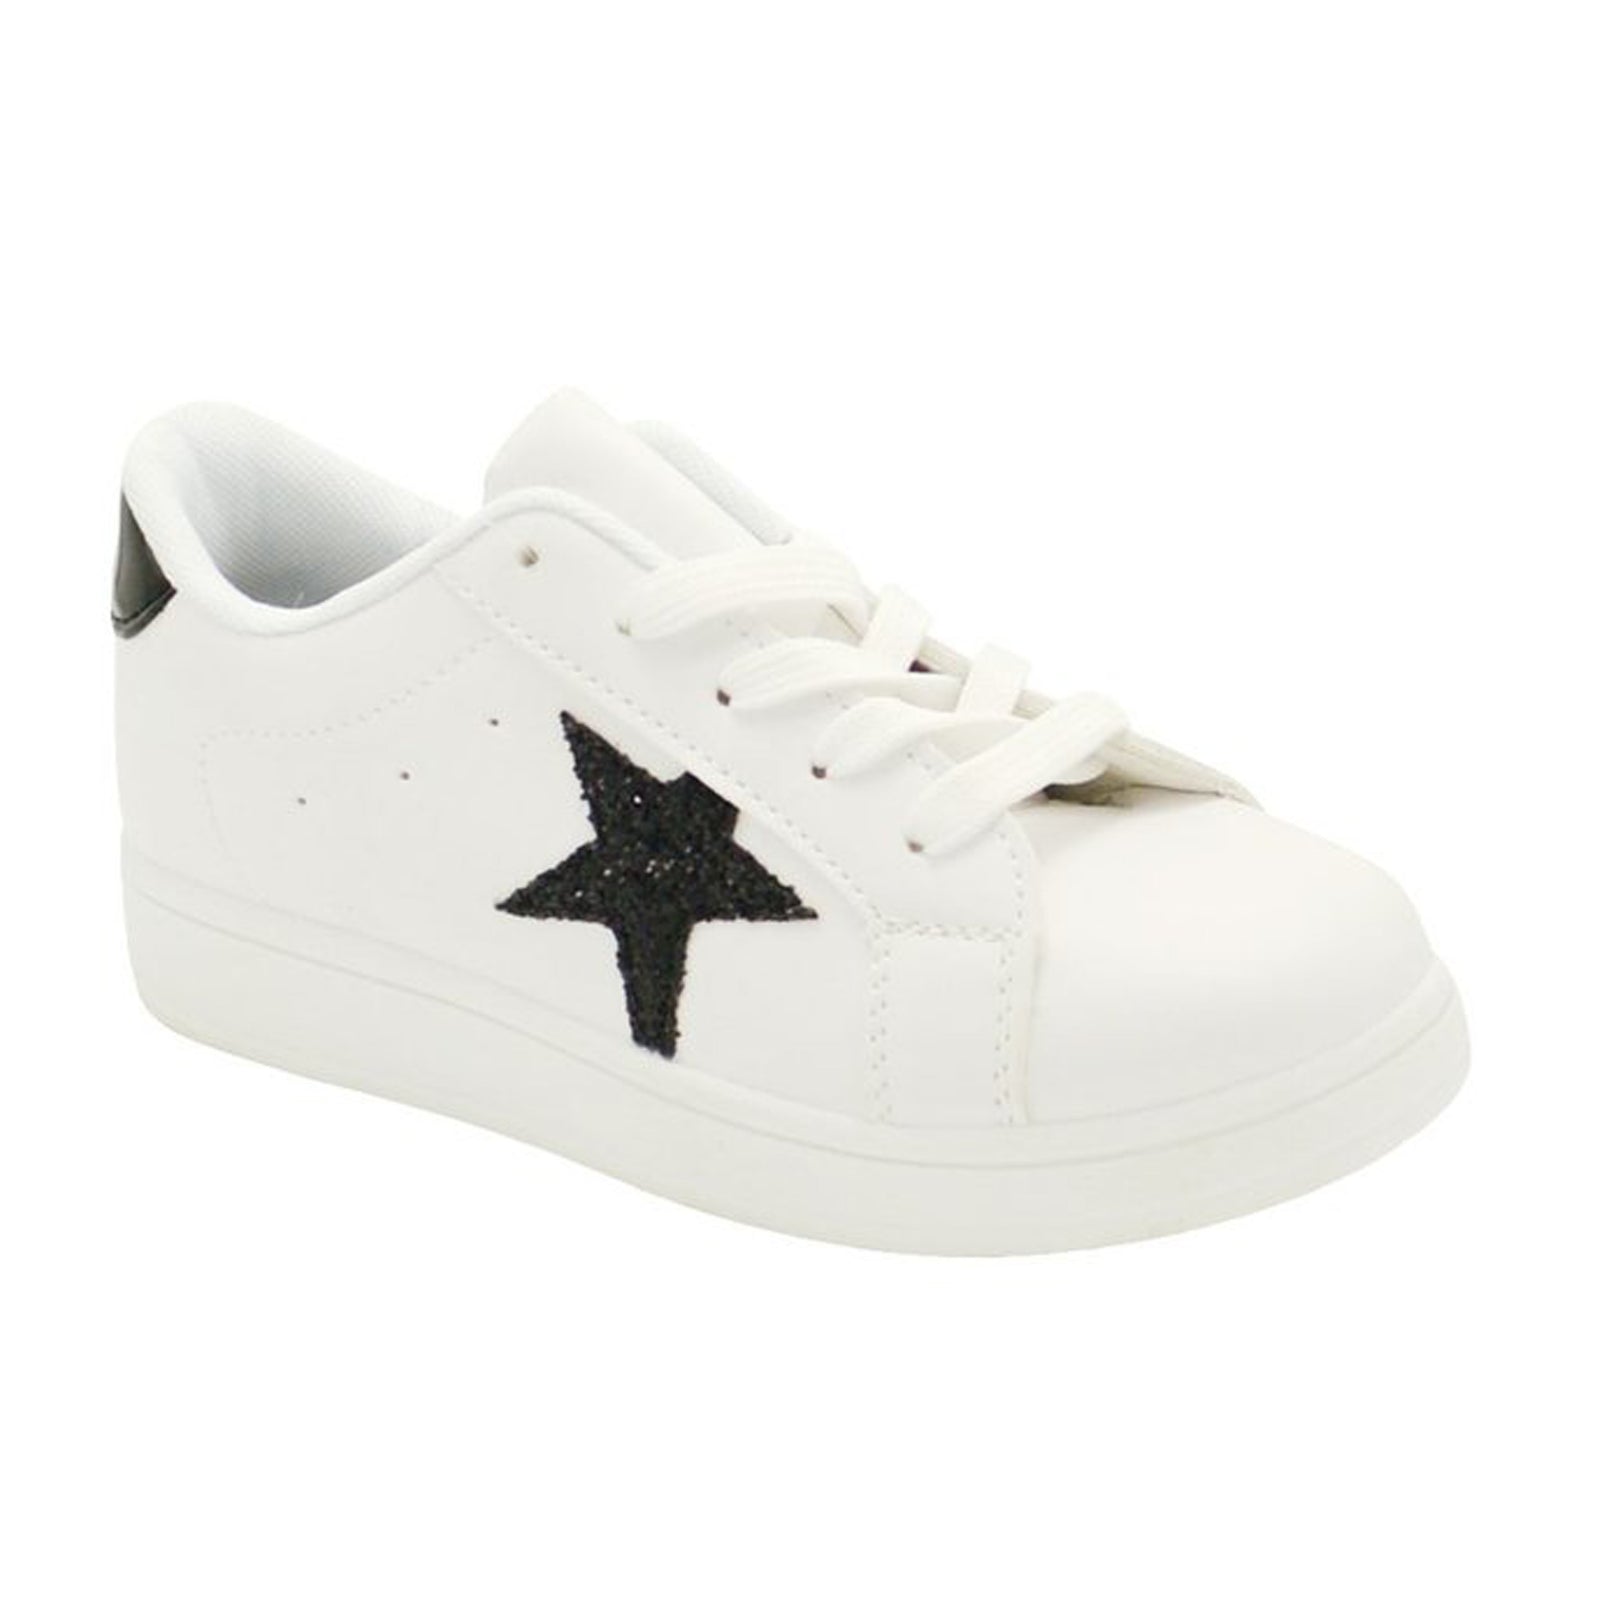 Wholesale Children's Shoes For Kids Sneakers Stars School NG2k